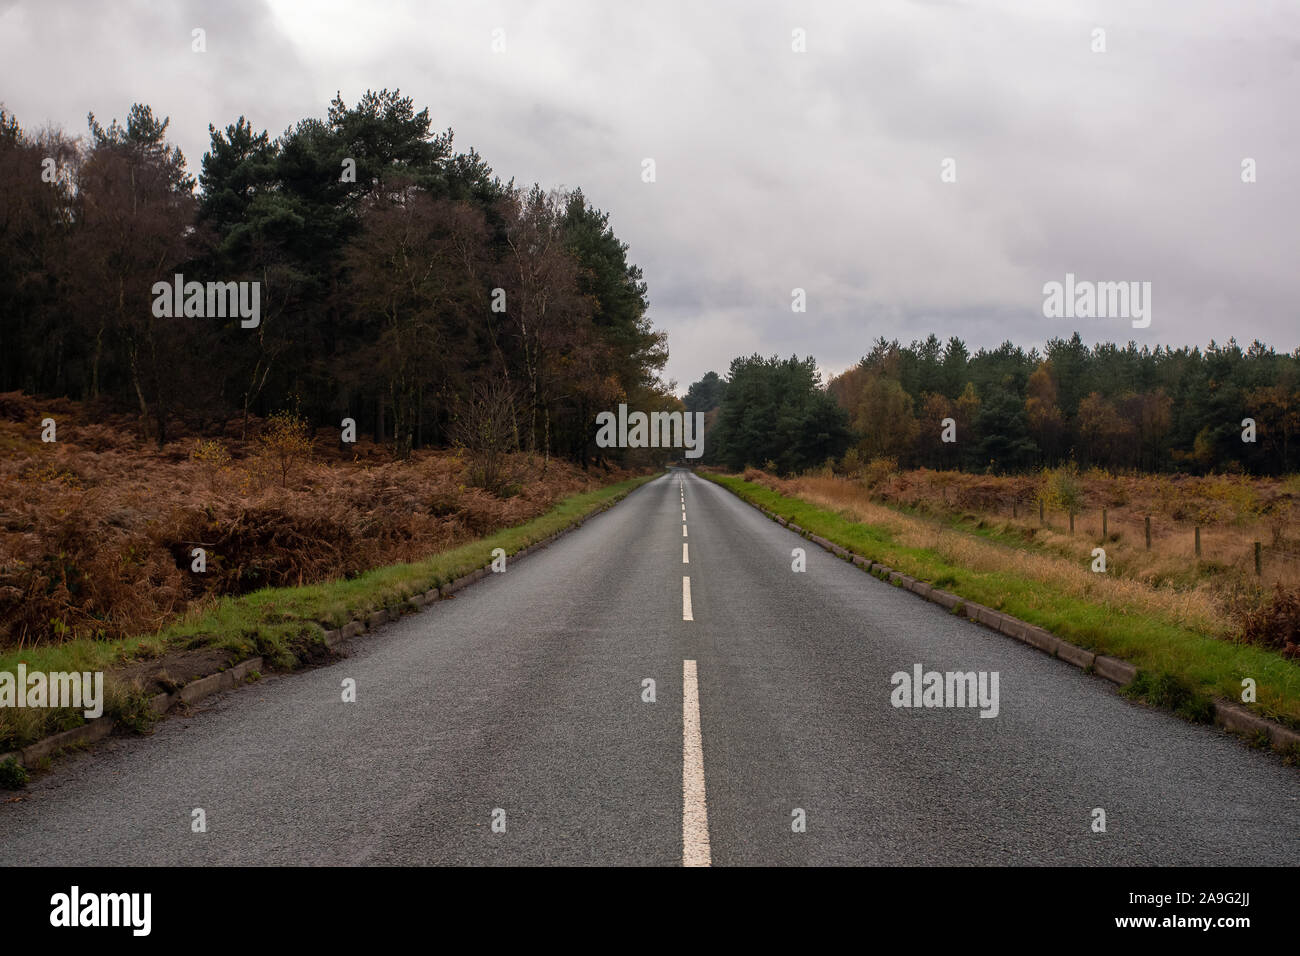 Middle of the road in a forest, cannock chase forest, autumn, landscape Stock Photo